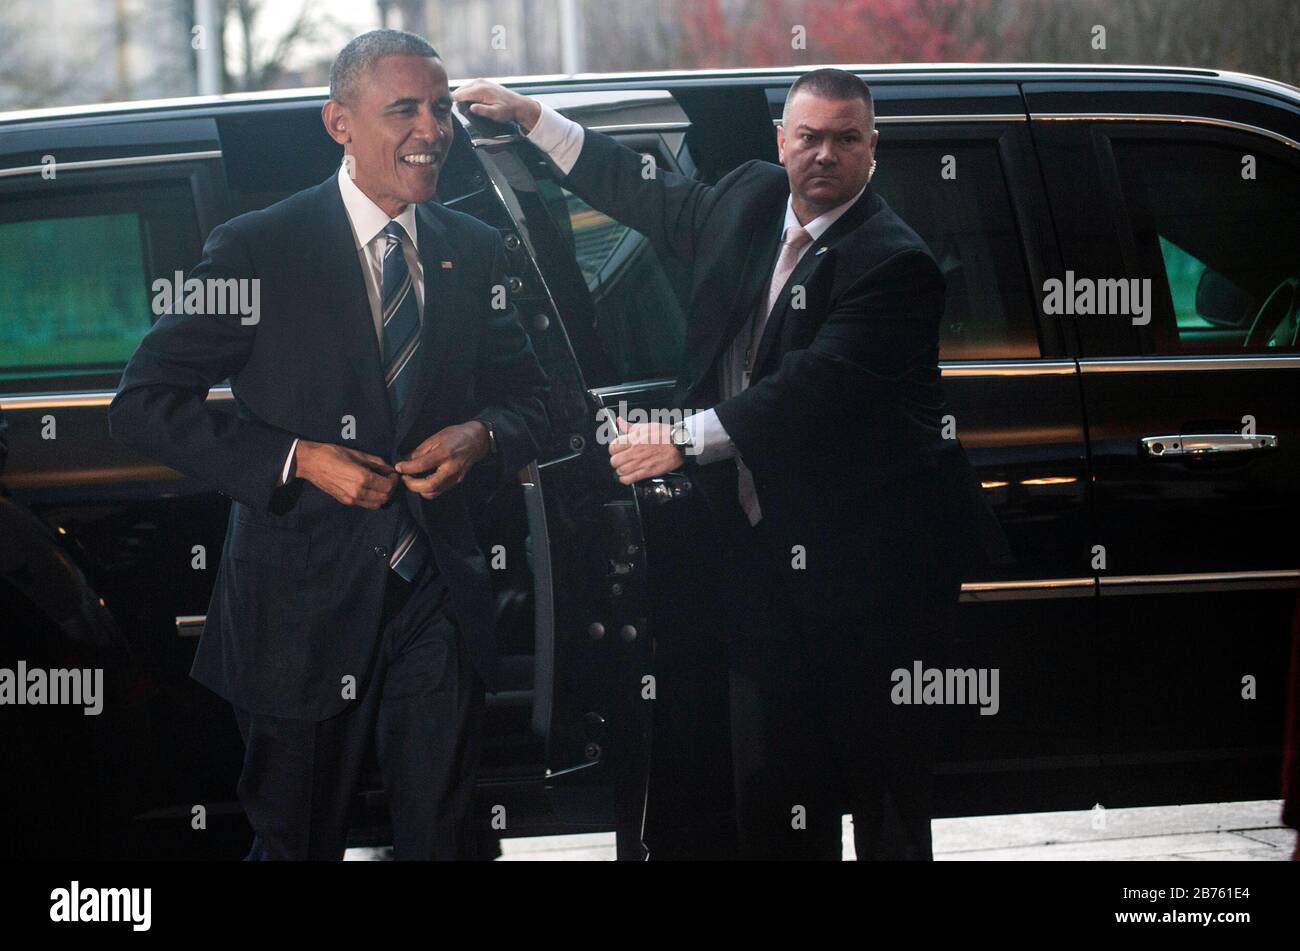 Germany, Berlin, 17.11.2016. Visit of Barack H. Obama, President of the United States of America to the Federal Chancellery in Berlin on 17.11.2016. Barack H. Obama, President of the United States of America. In the background: Obama's company car, "The Beast", visually a Cadillac, by weight a truck. Barack Obama's company car is expected to weigh between five and eight tons, the weight being carried by the frame of a pickup truck. [automated translation] Stock Photo